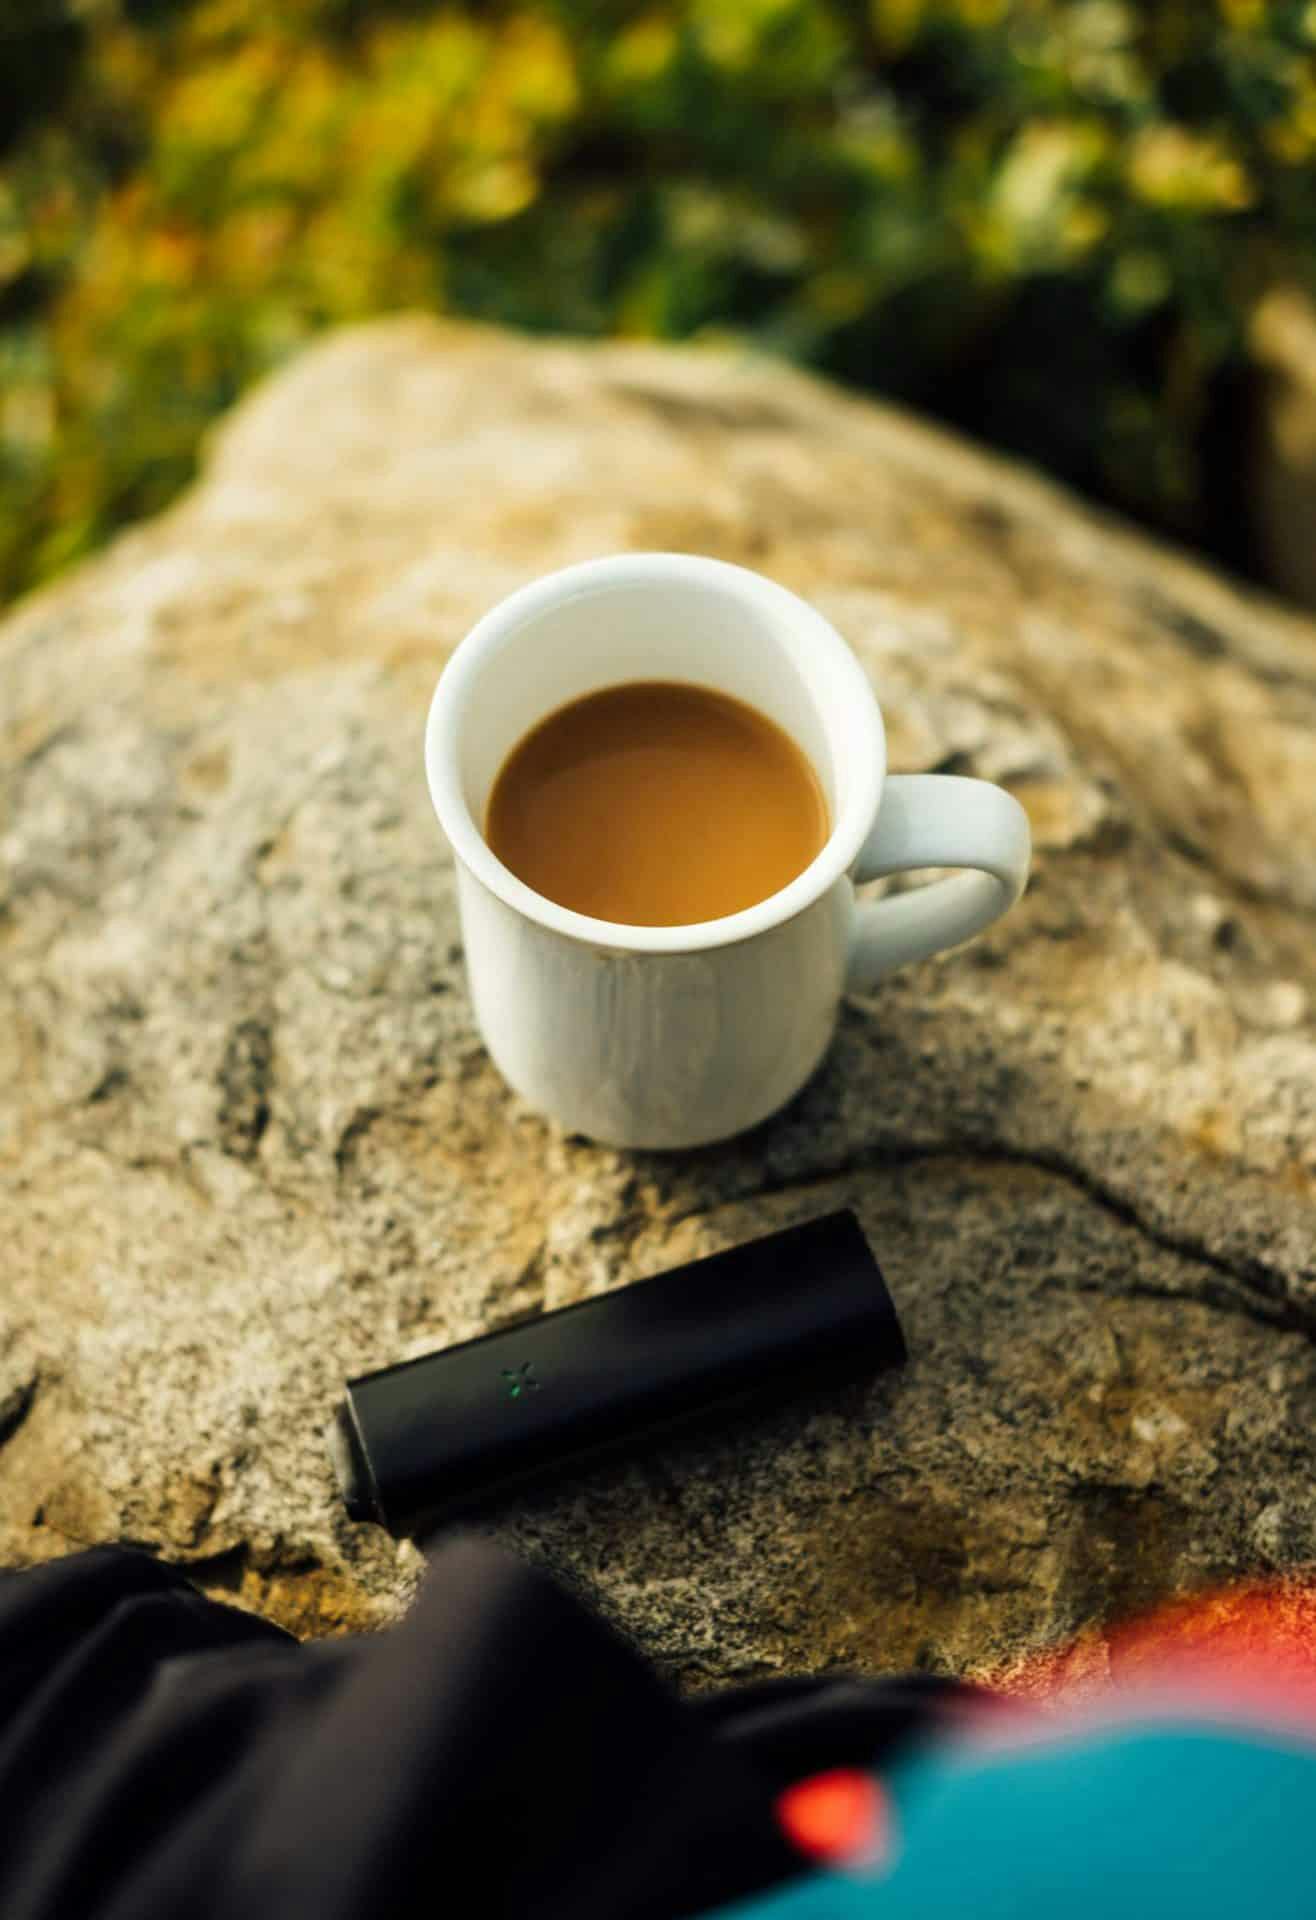 picture of coffee mug and cannabis vaporizer on a rock